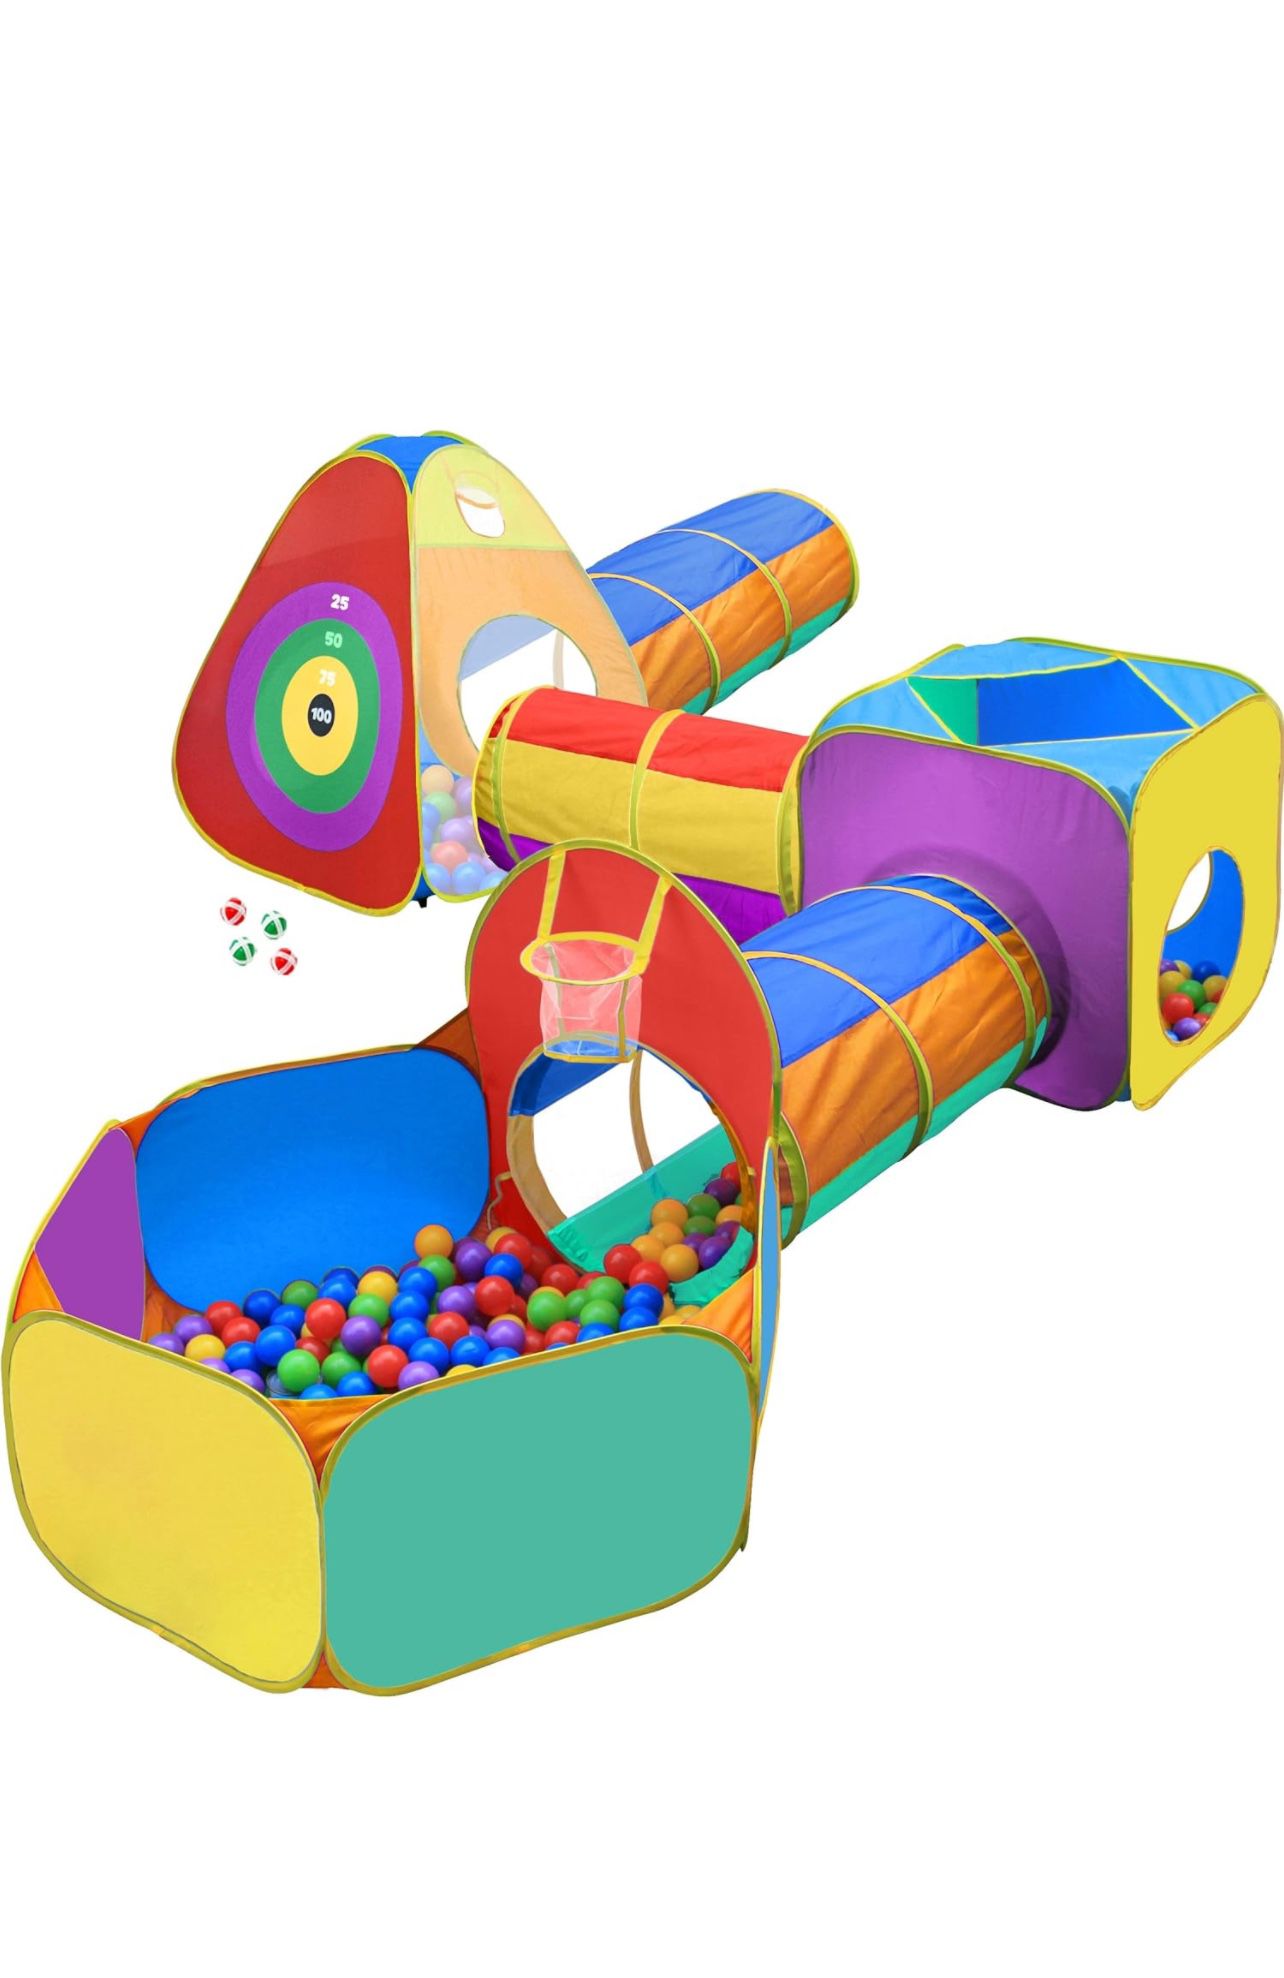 Gift for Toddler Boys & Girls, Ball Pit, Play Tent and Tunnels for Kids, Best Birthday Gift for 3 4 5 Year Old Pop Up Baby Play Toy, Target Game w/ 4 